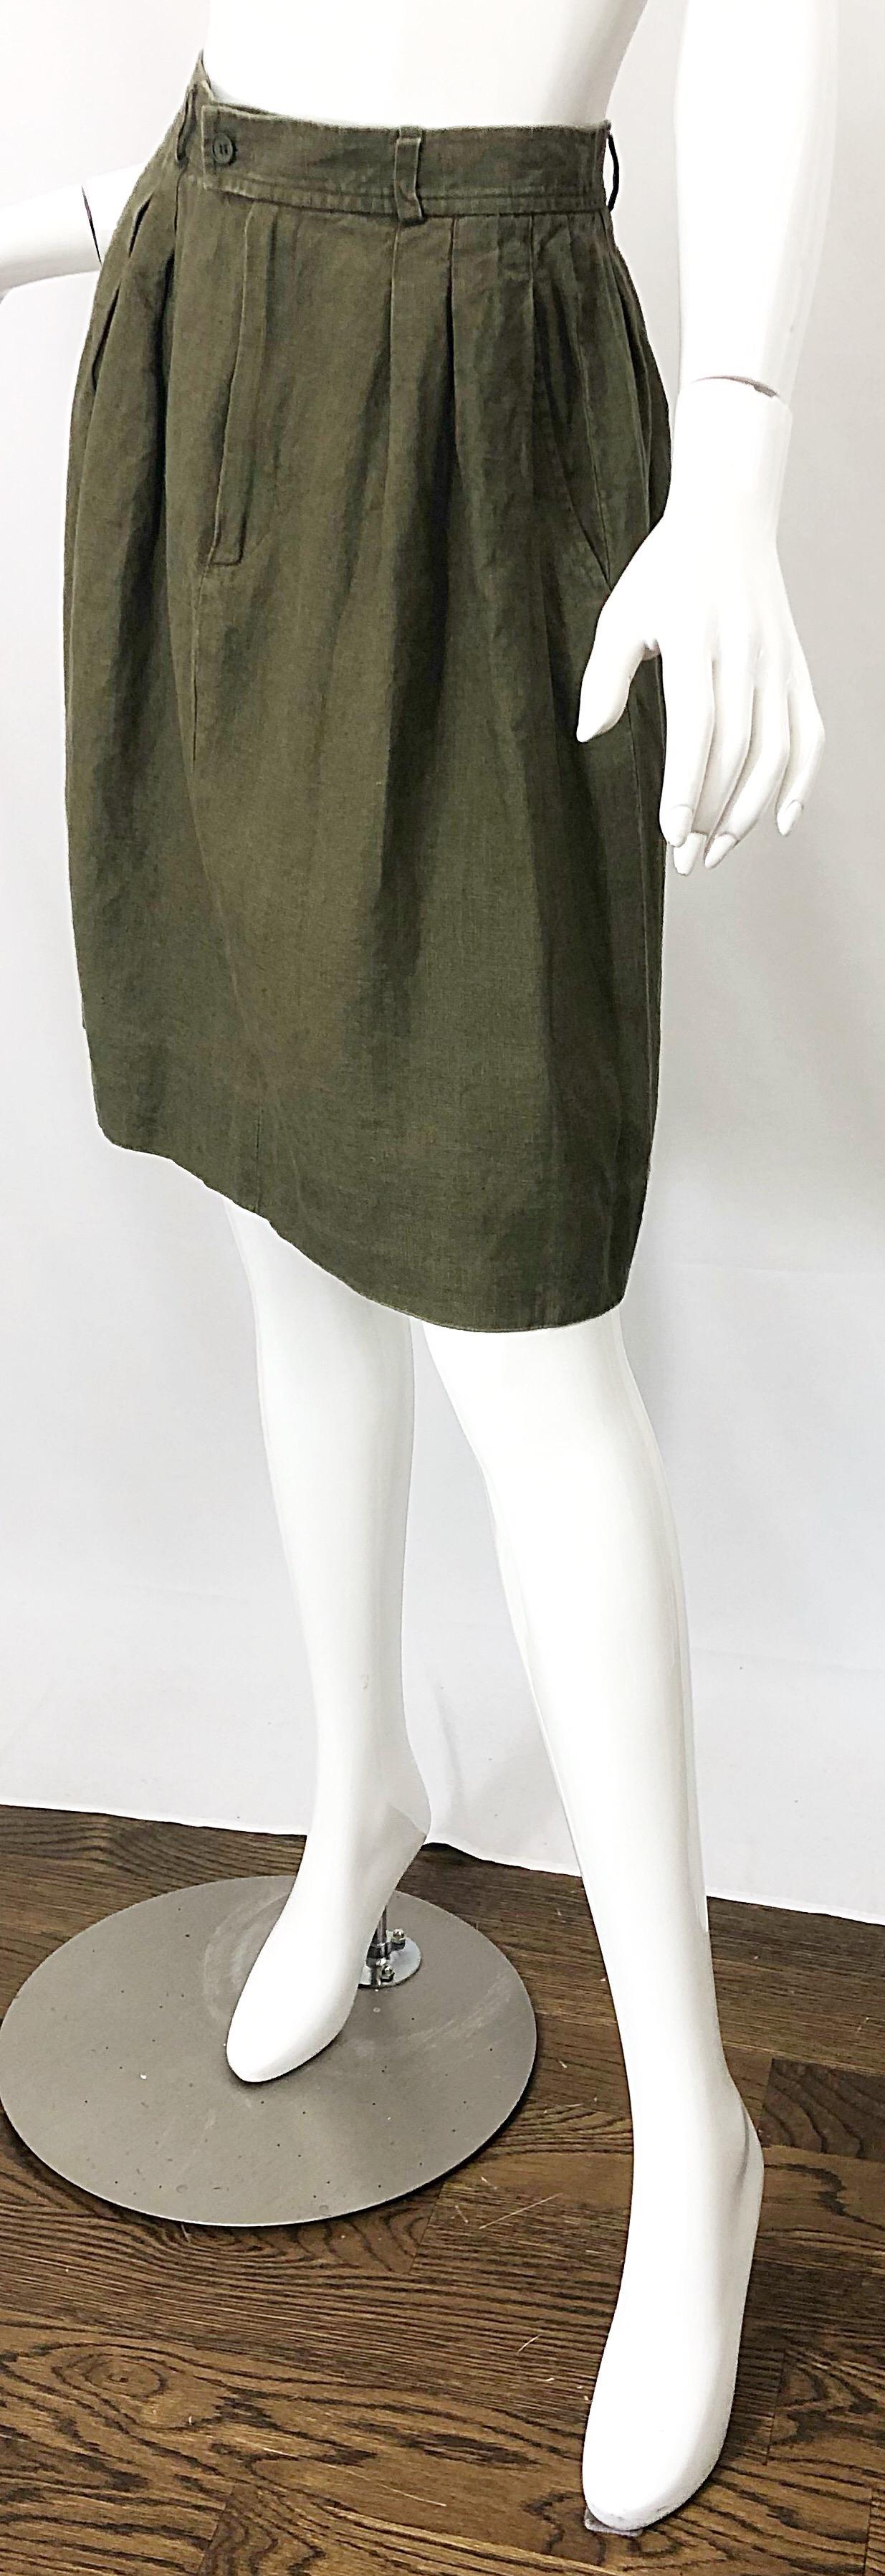 1990s Yves Saint Laurent YSL Rive Gauche Army Green Vintage 90s Linen Skirt In Excellent Condition For Sale In San Diego, CA